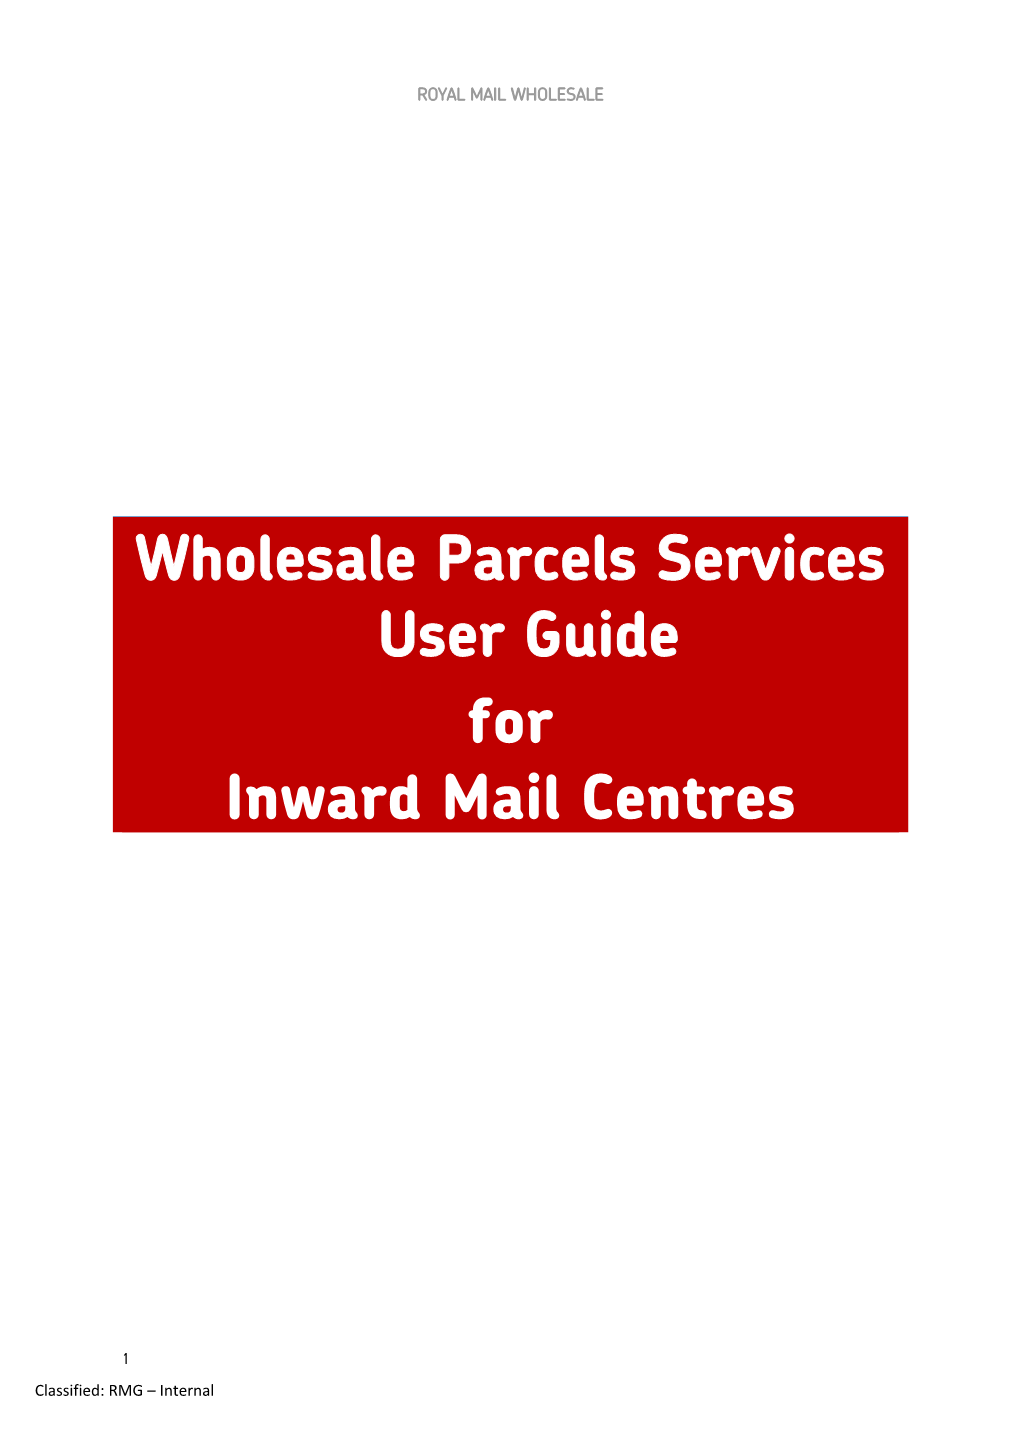 Wholesale Parcels Services User Guide for Inward Mail Centres